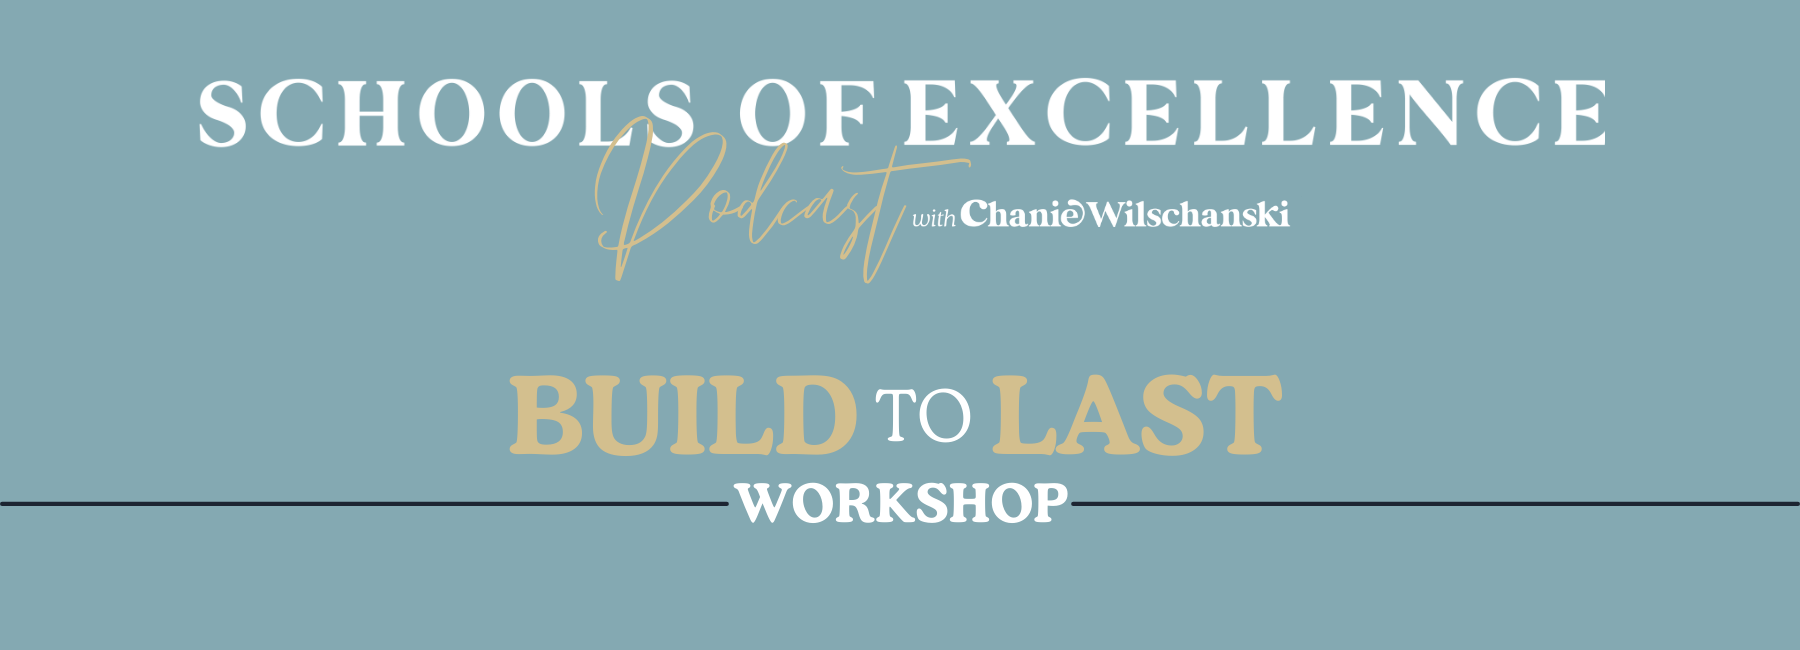 Build to Last: How to Improve your Mindset with Vision Casting and Decision Making